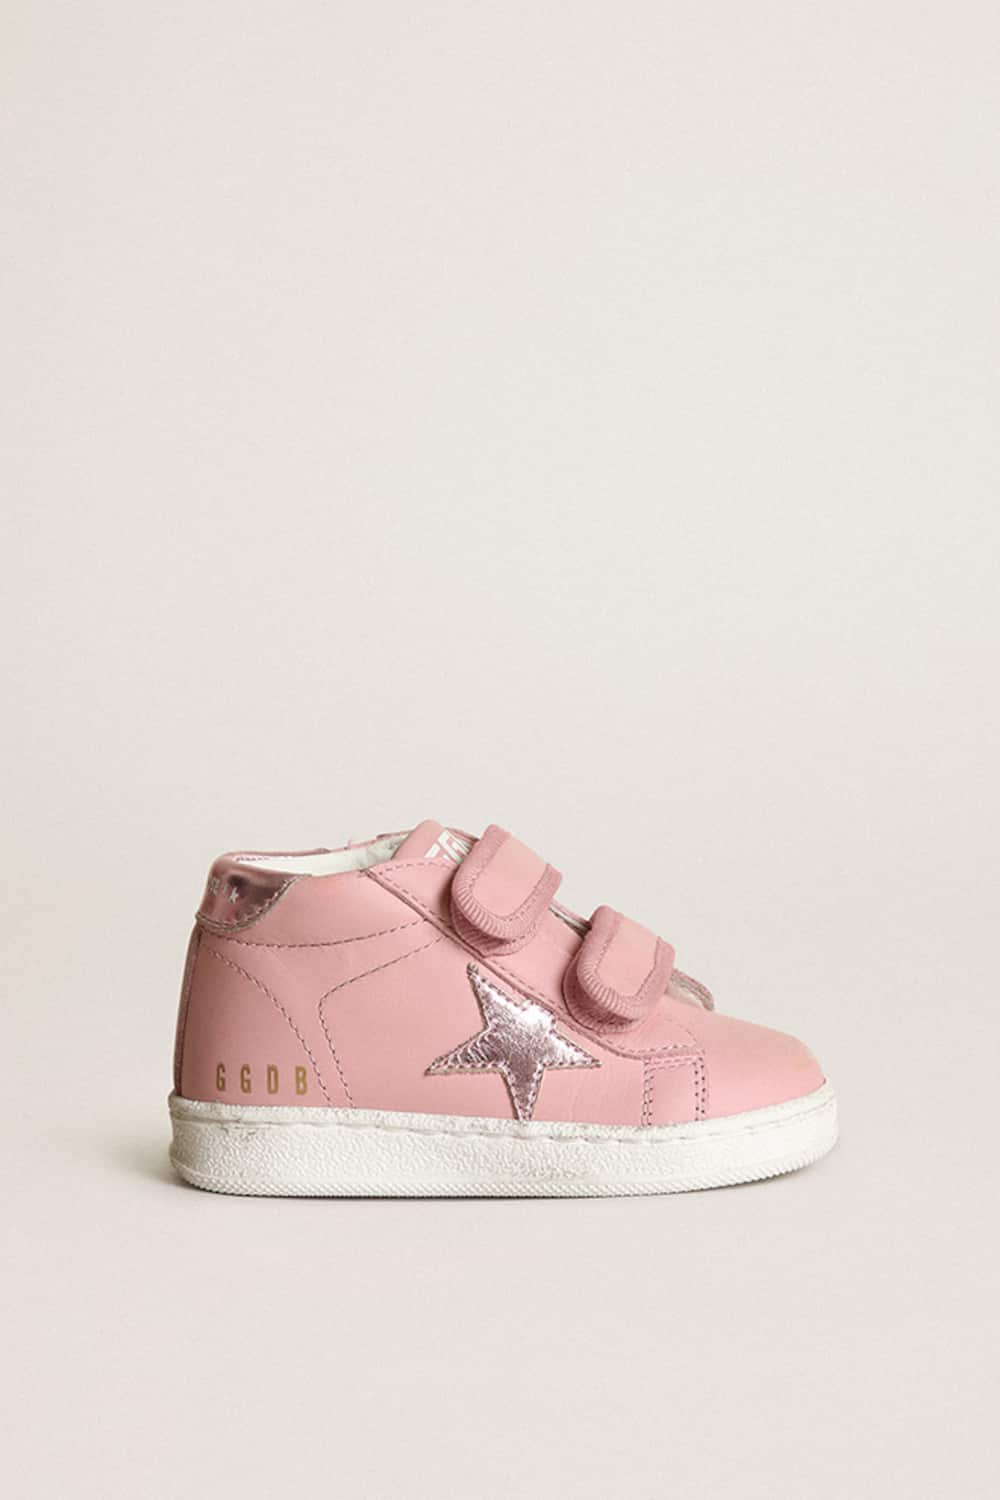 Golden Goose - June in pink nappa with pink metallic leather star and heel tab in 